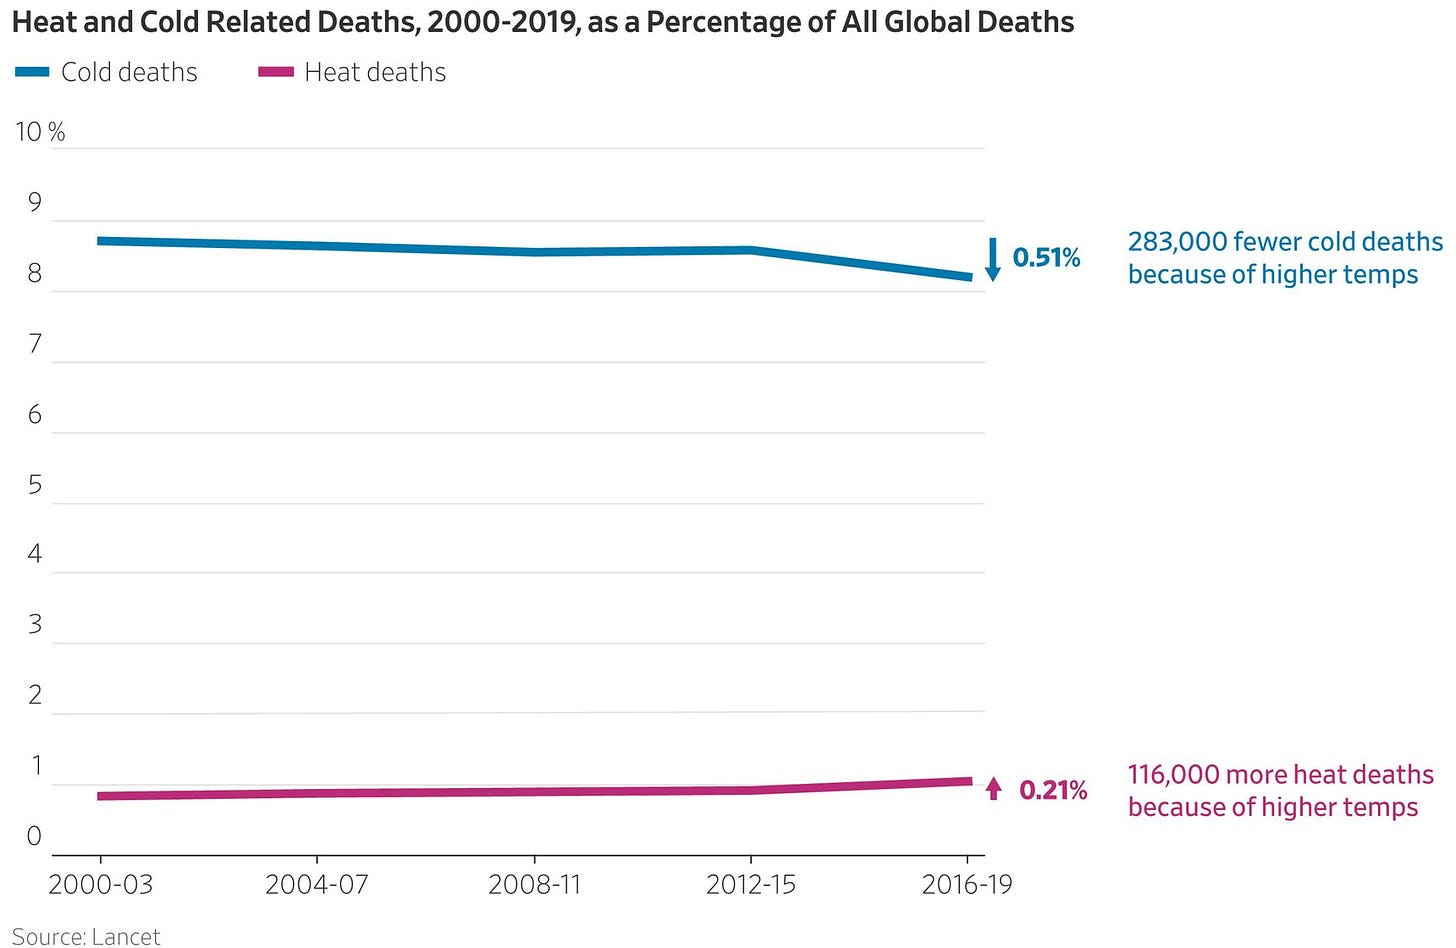 Heat and cold related deaths, 2000-2019, as a percentage of All Global Deaths